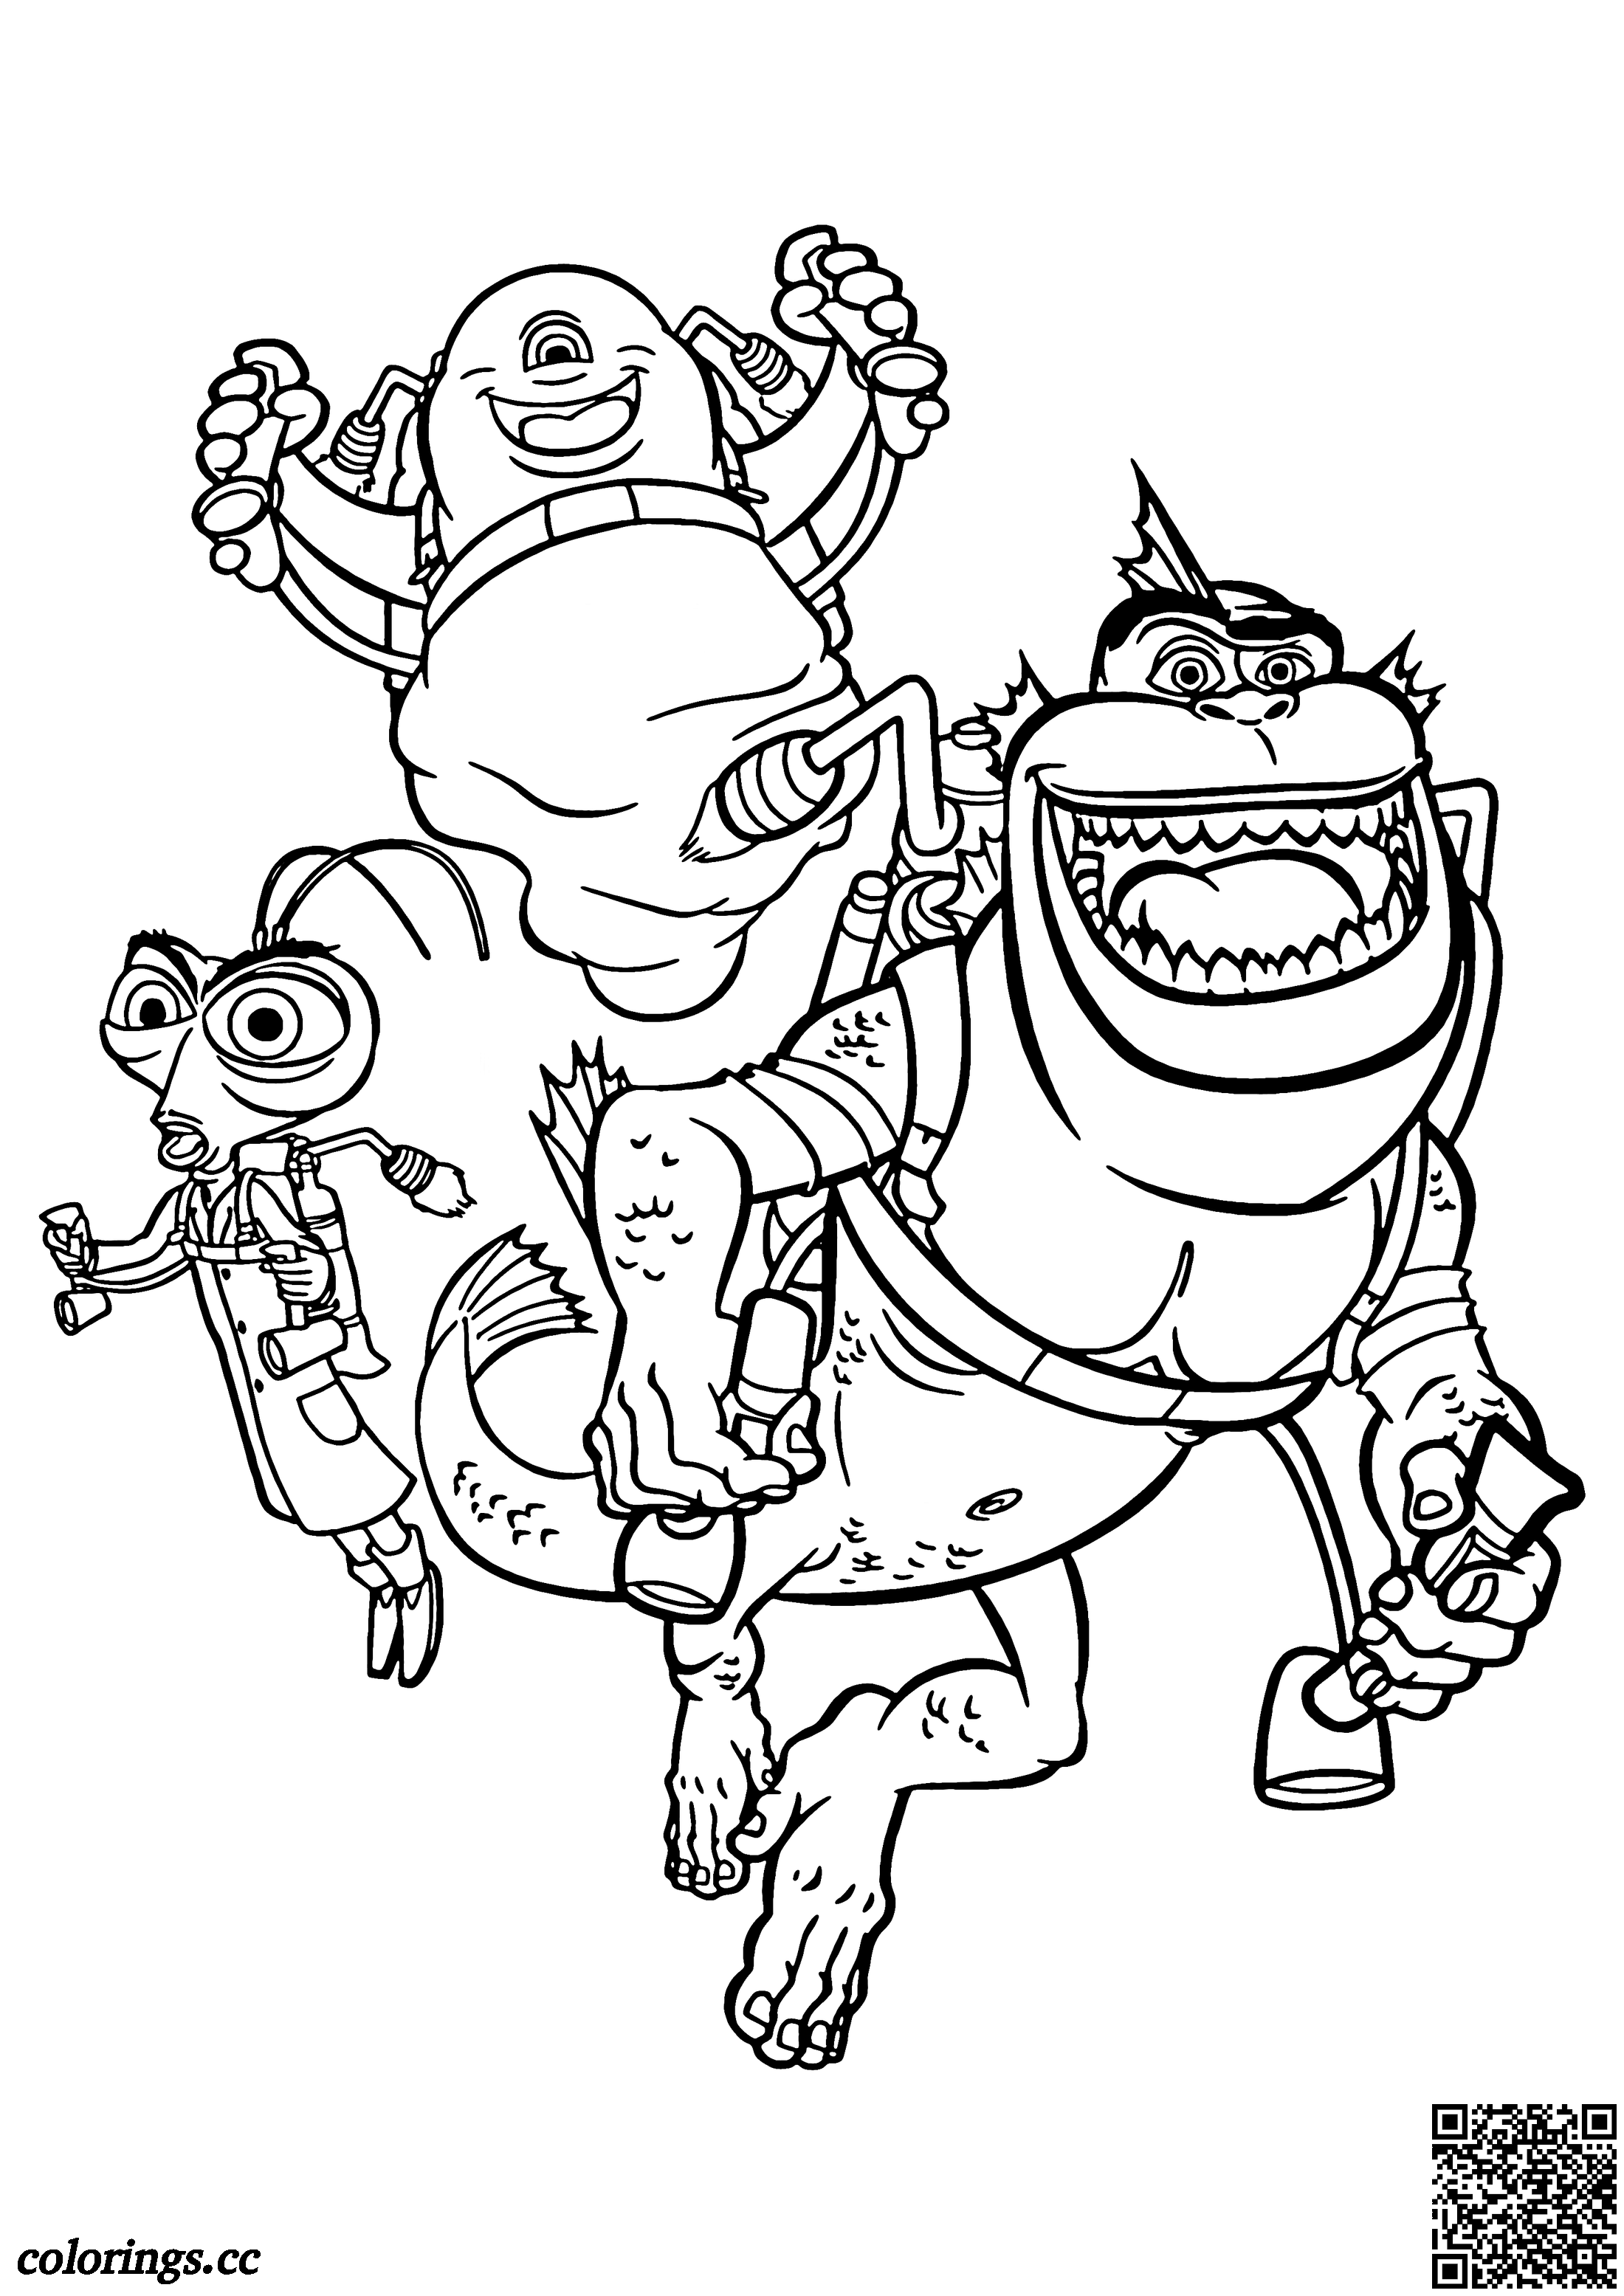 Dr. Cockroach P.H.D, B.O.B. and The Missing Link coloring pages ...